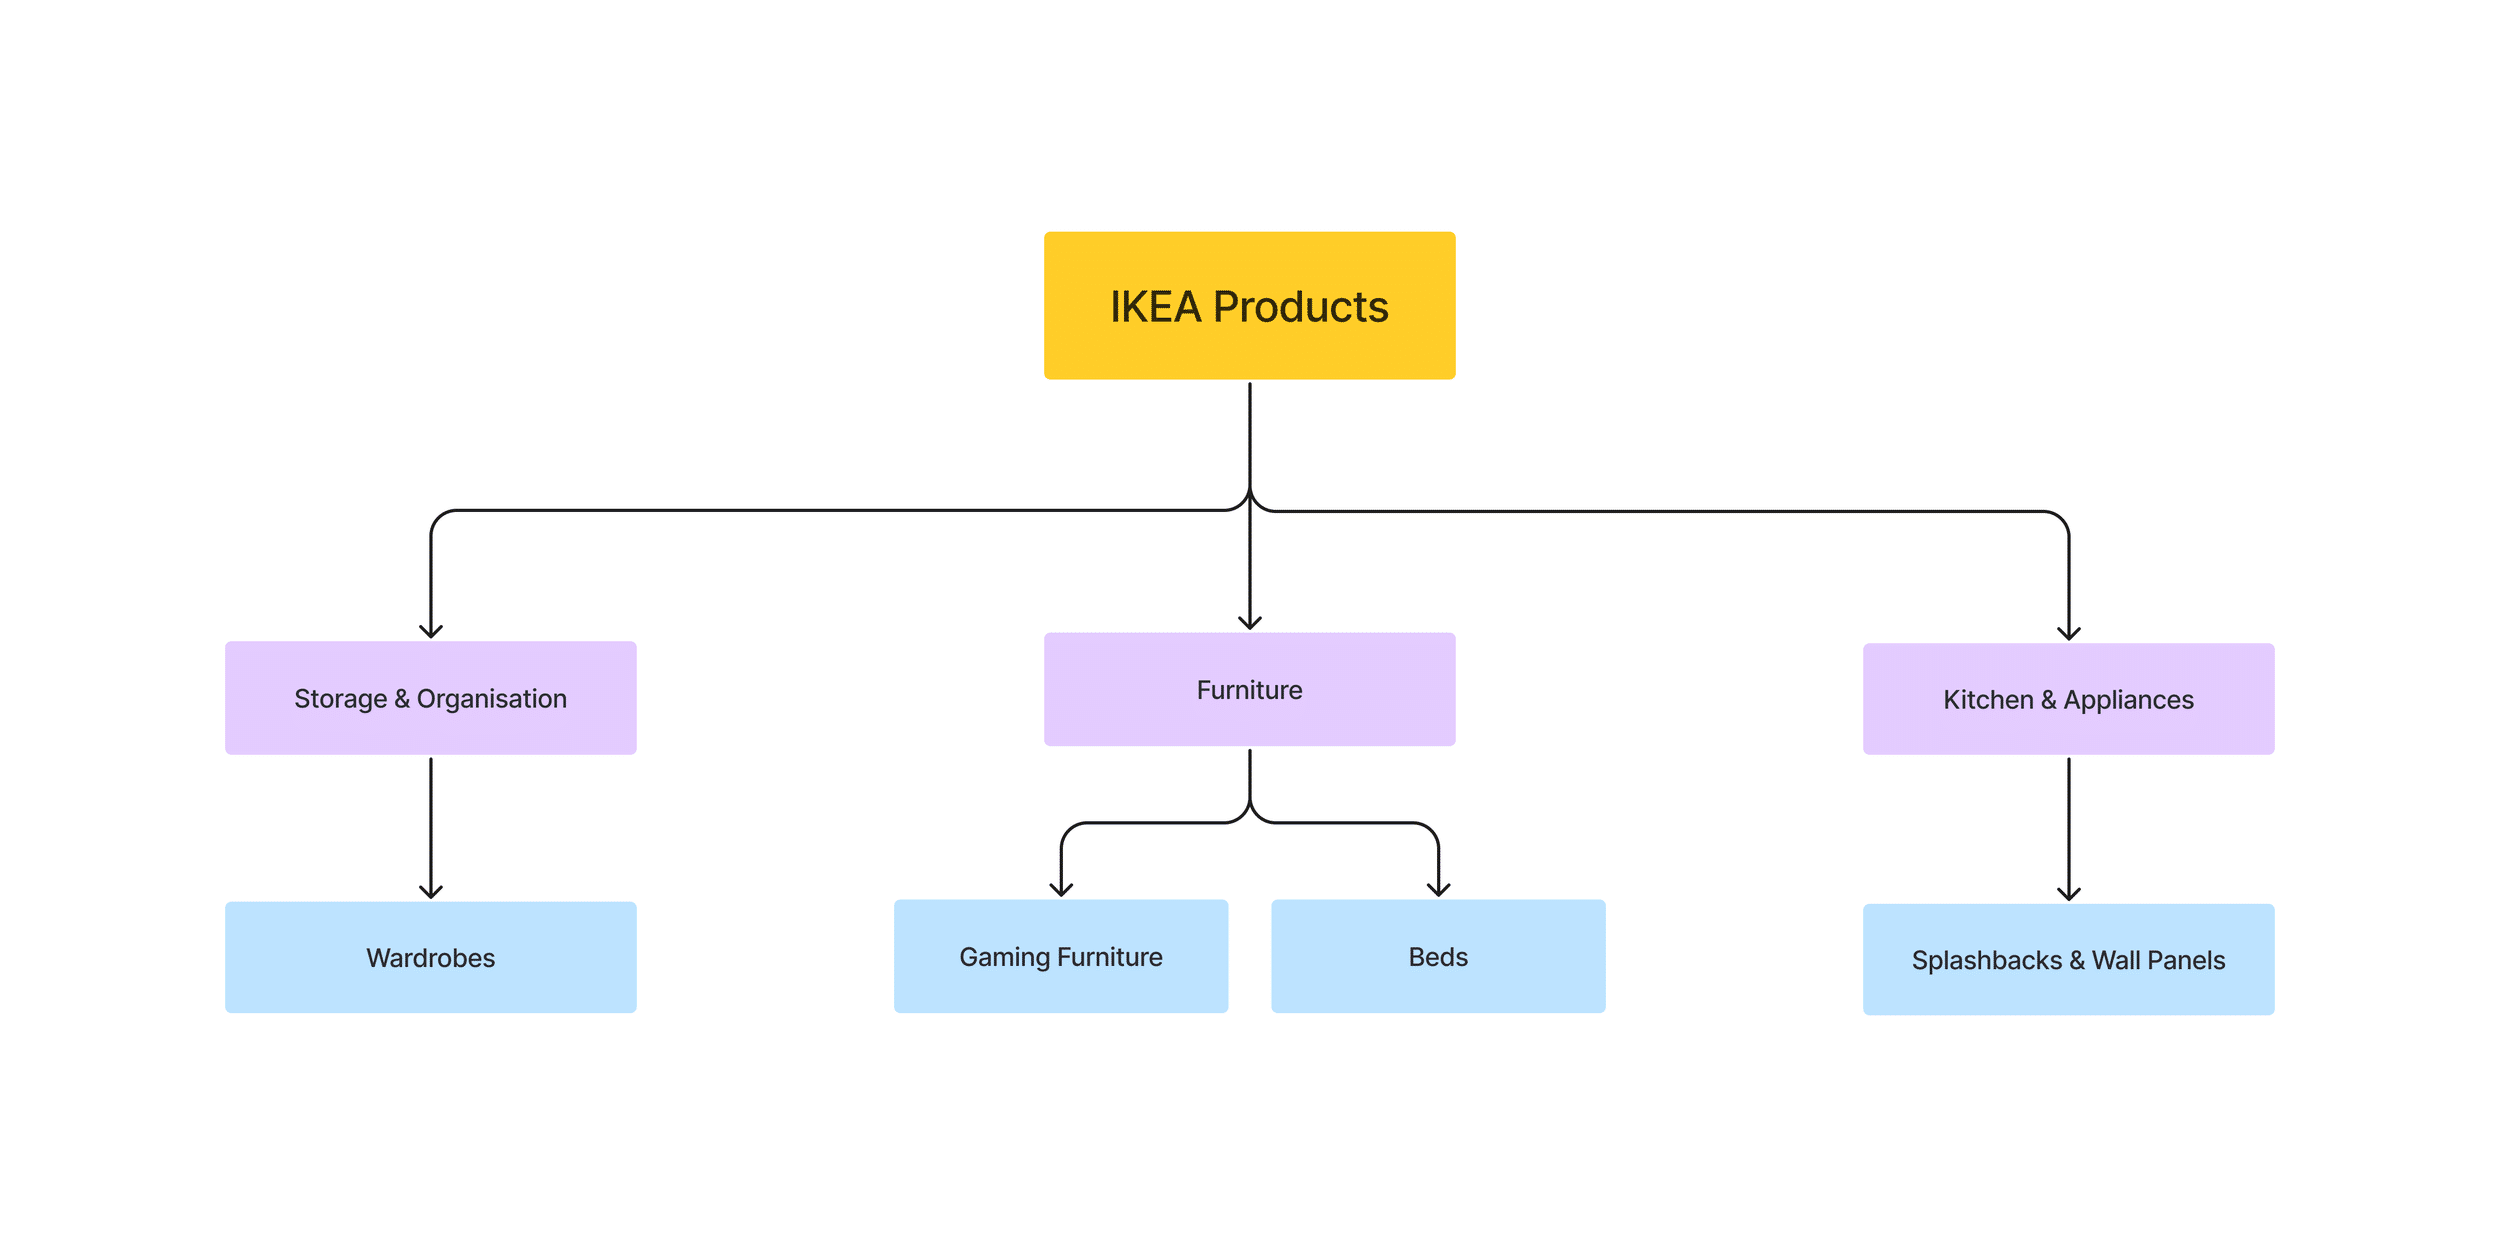 Organizational chart which shows product hierarchy for some of IKEA's products